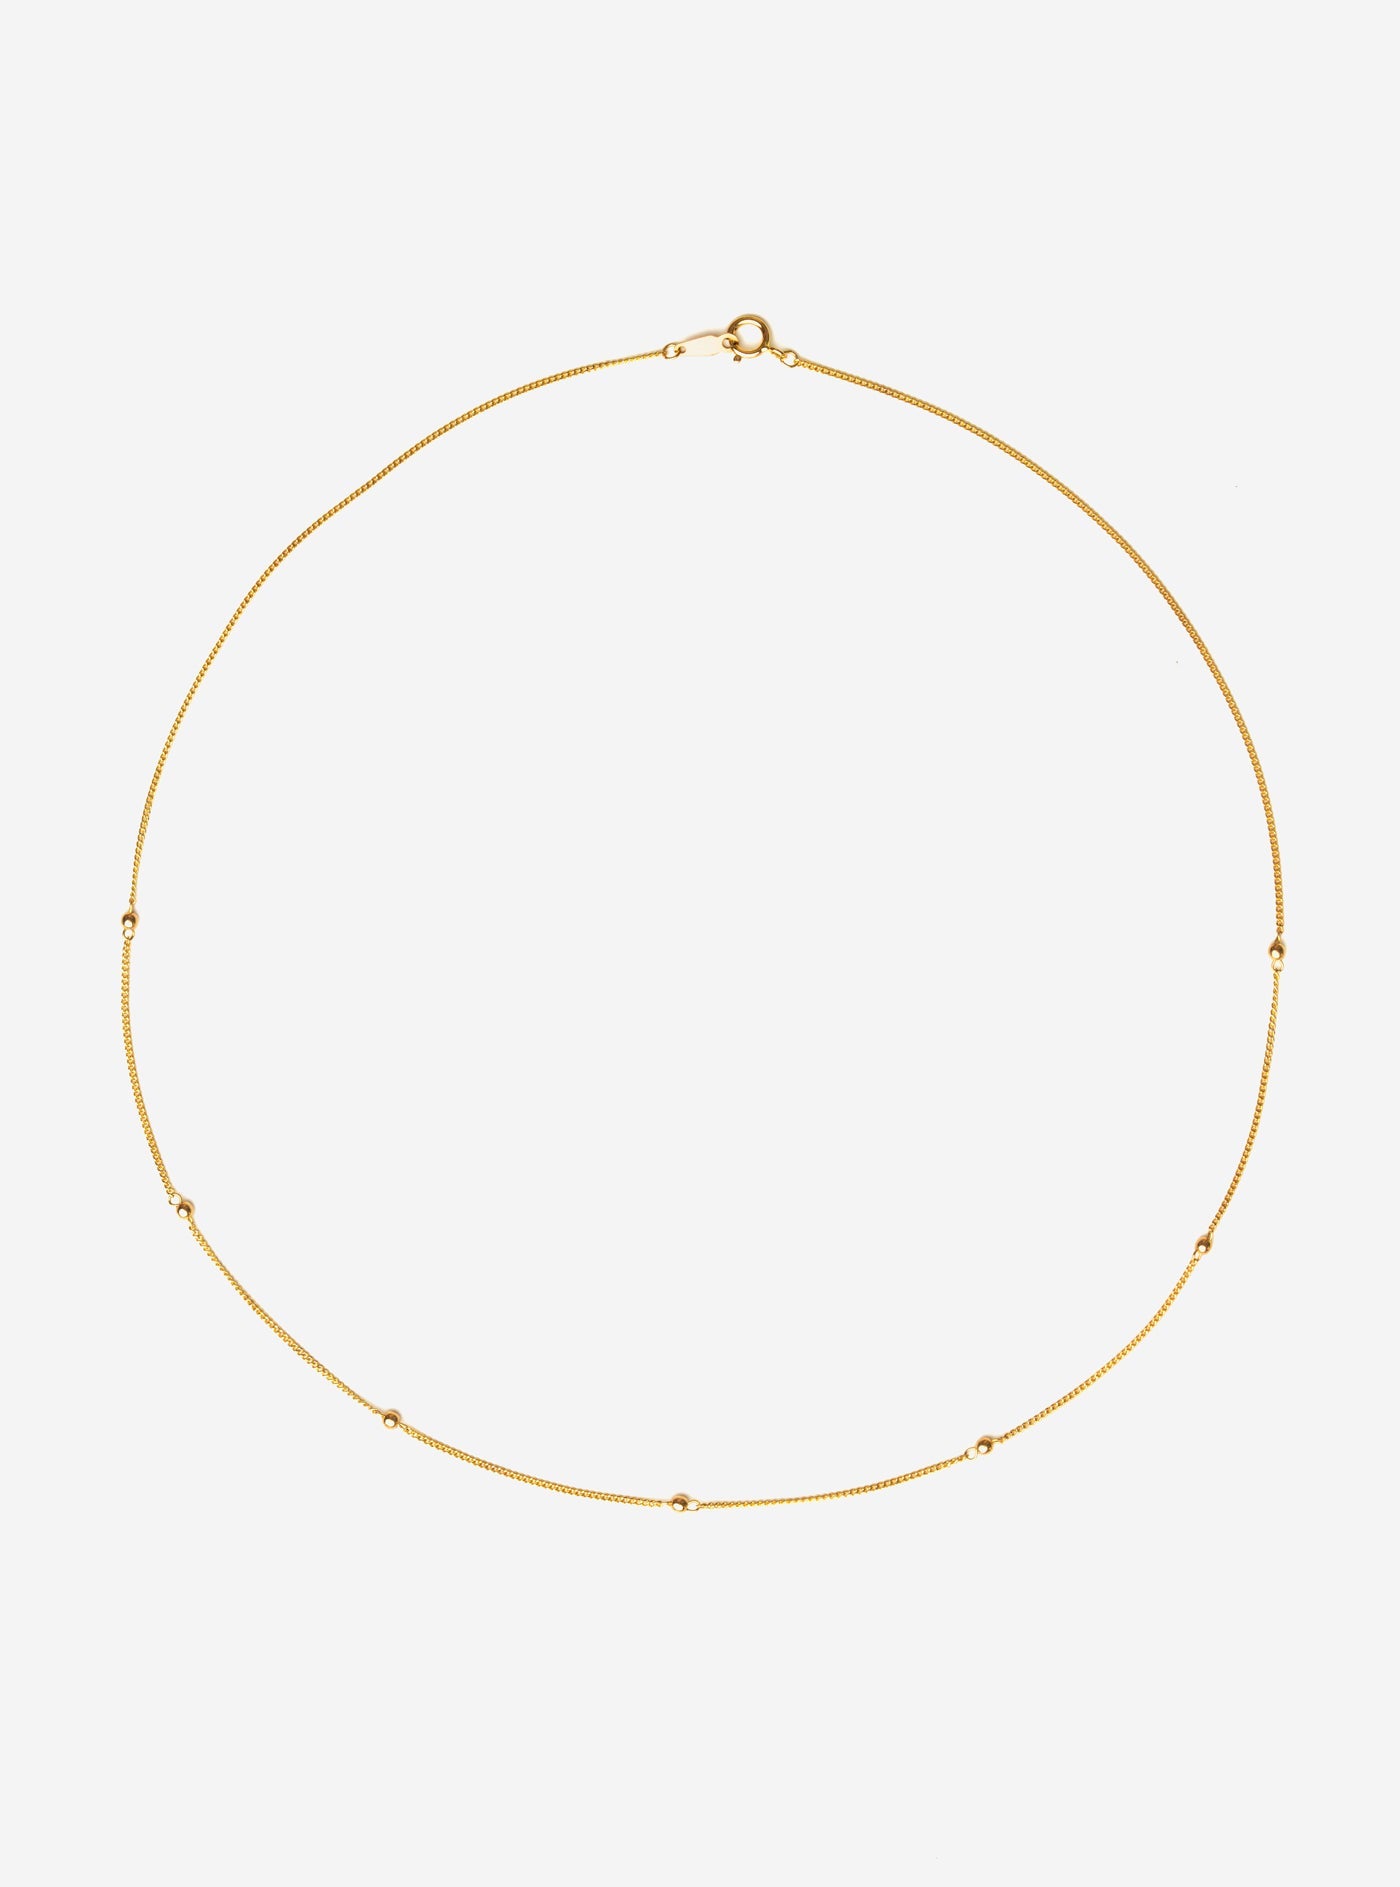 14k gold dainty choker necklace. perfect for layering. luxury gold necklace.